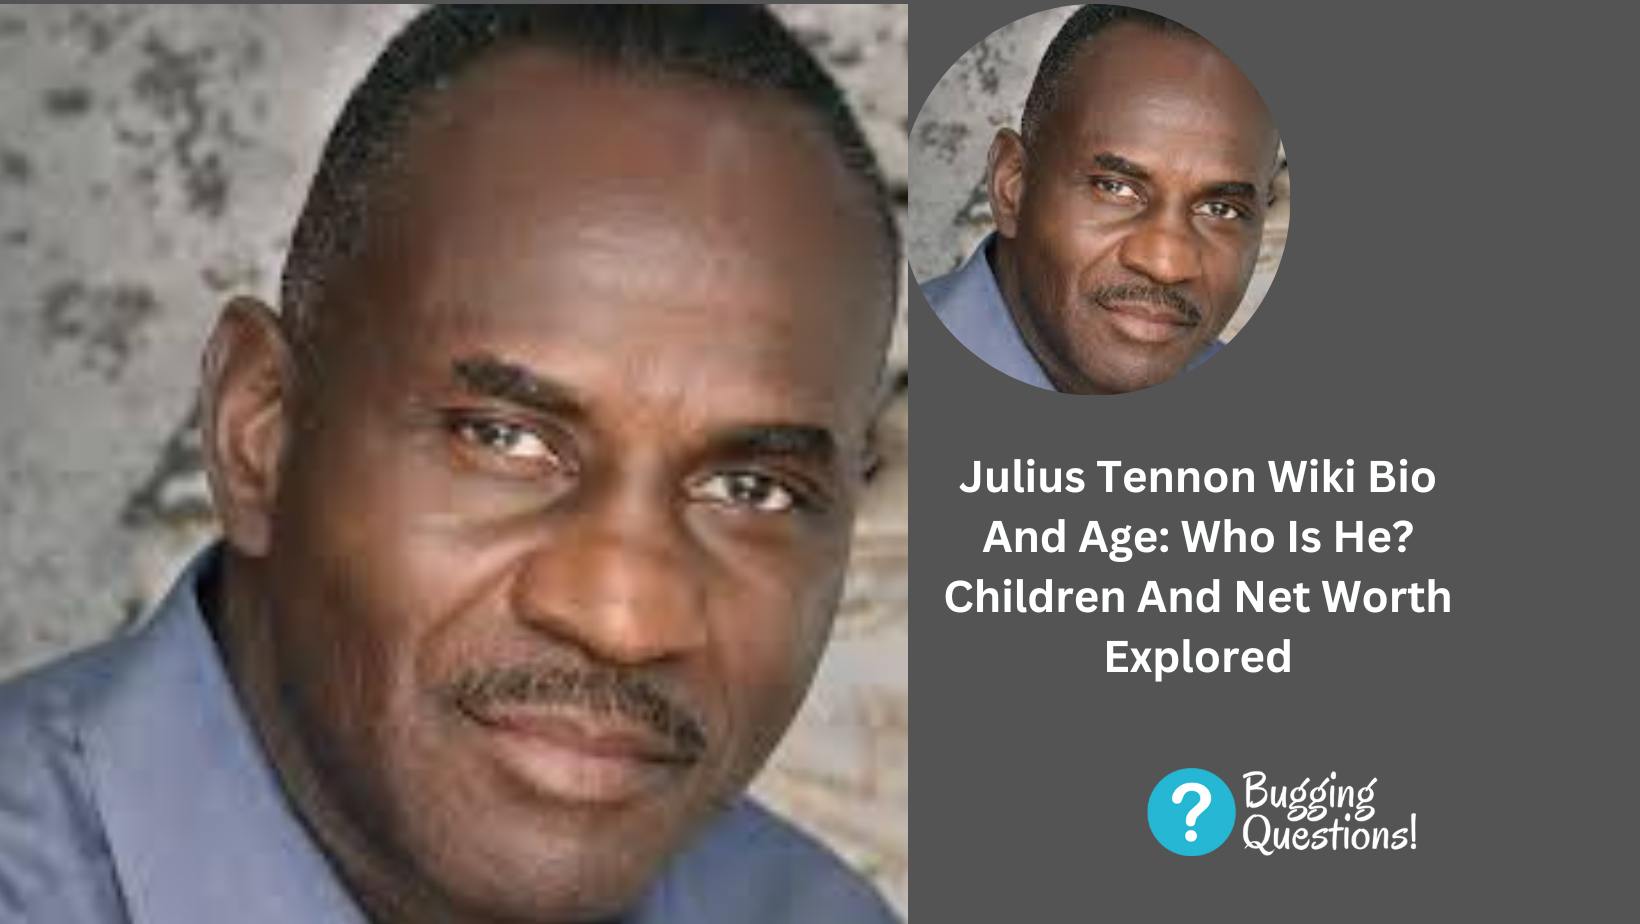 Julius Tennon Wiki Bio And Age: Who Is He?